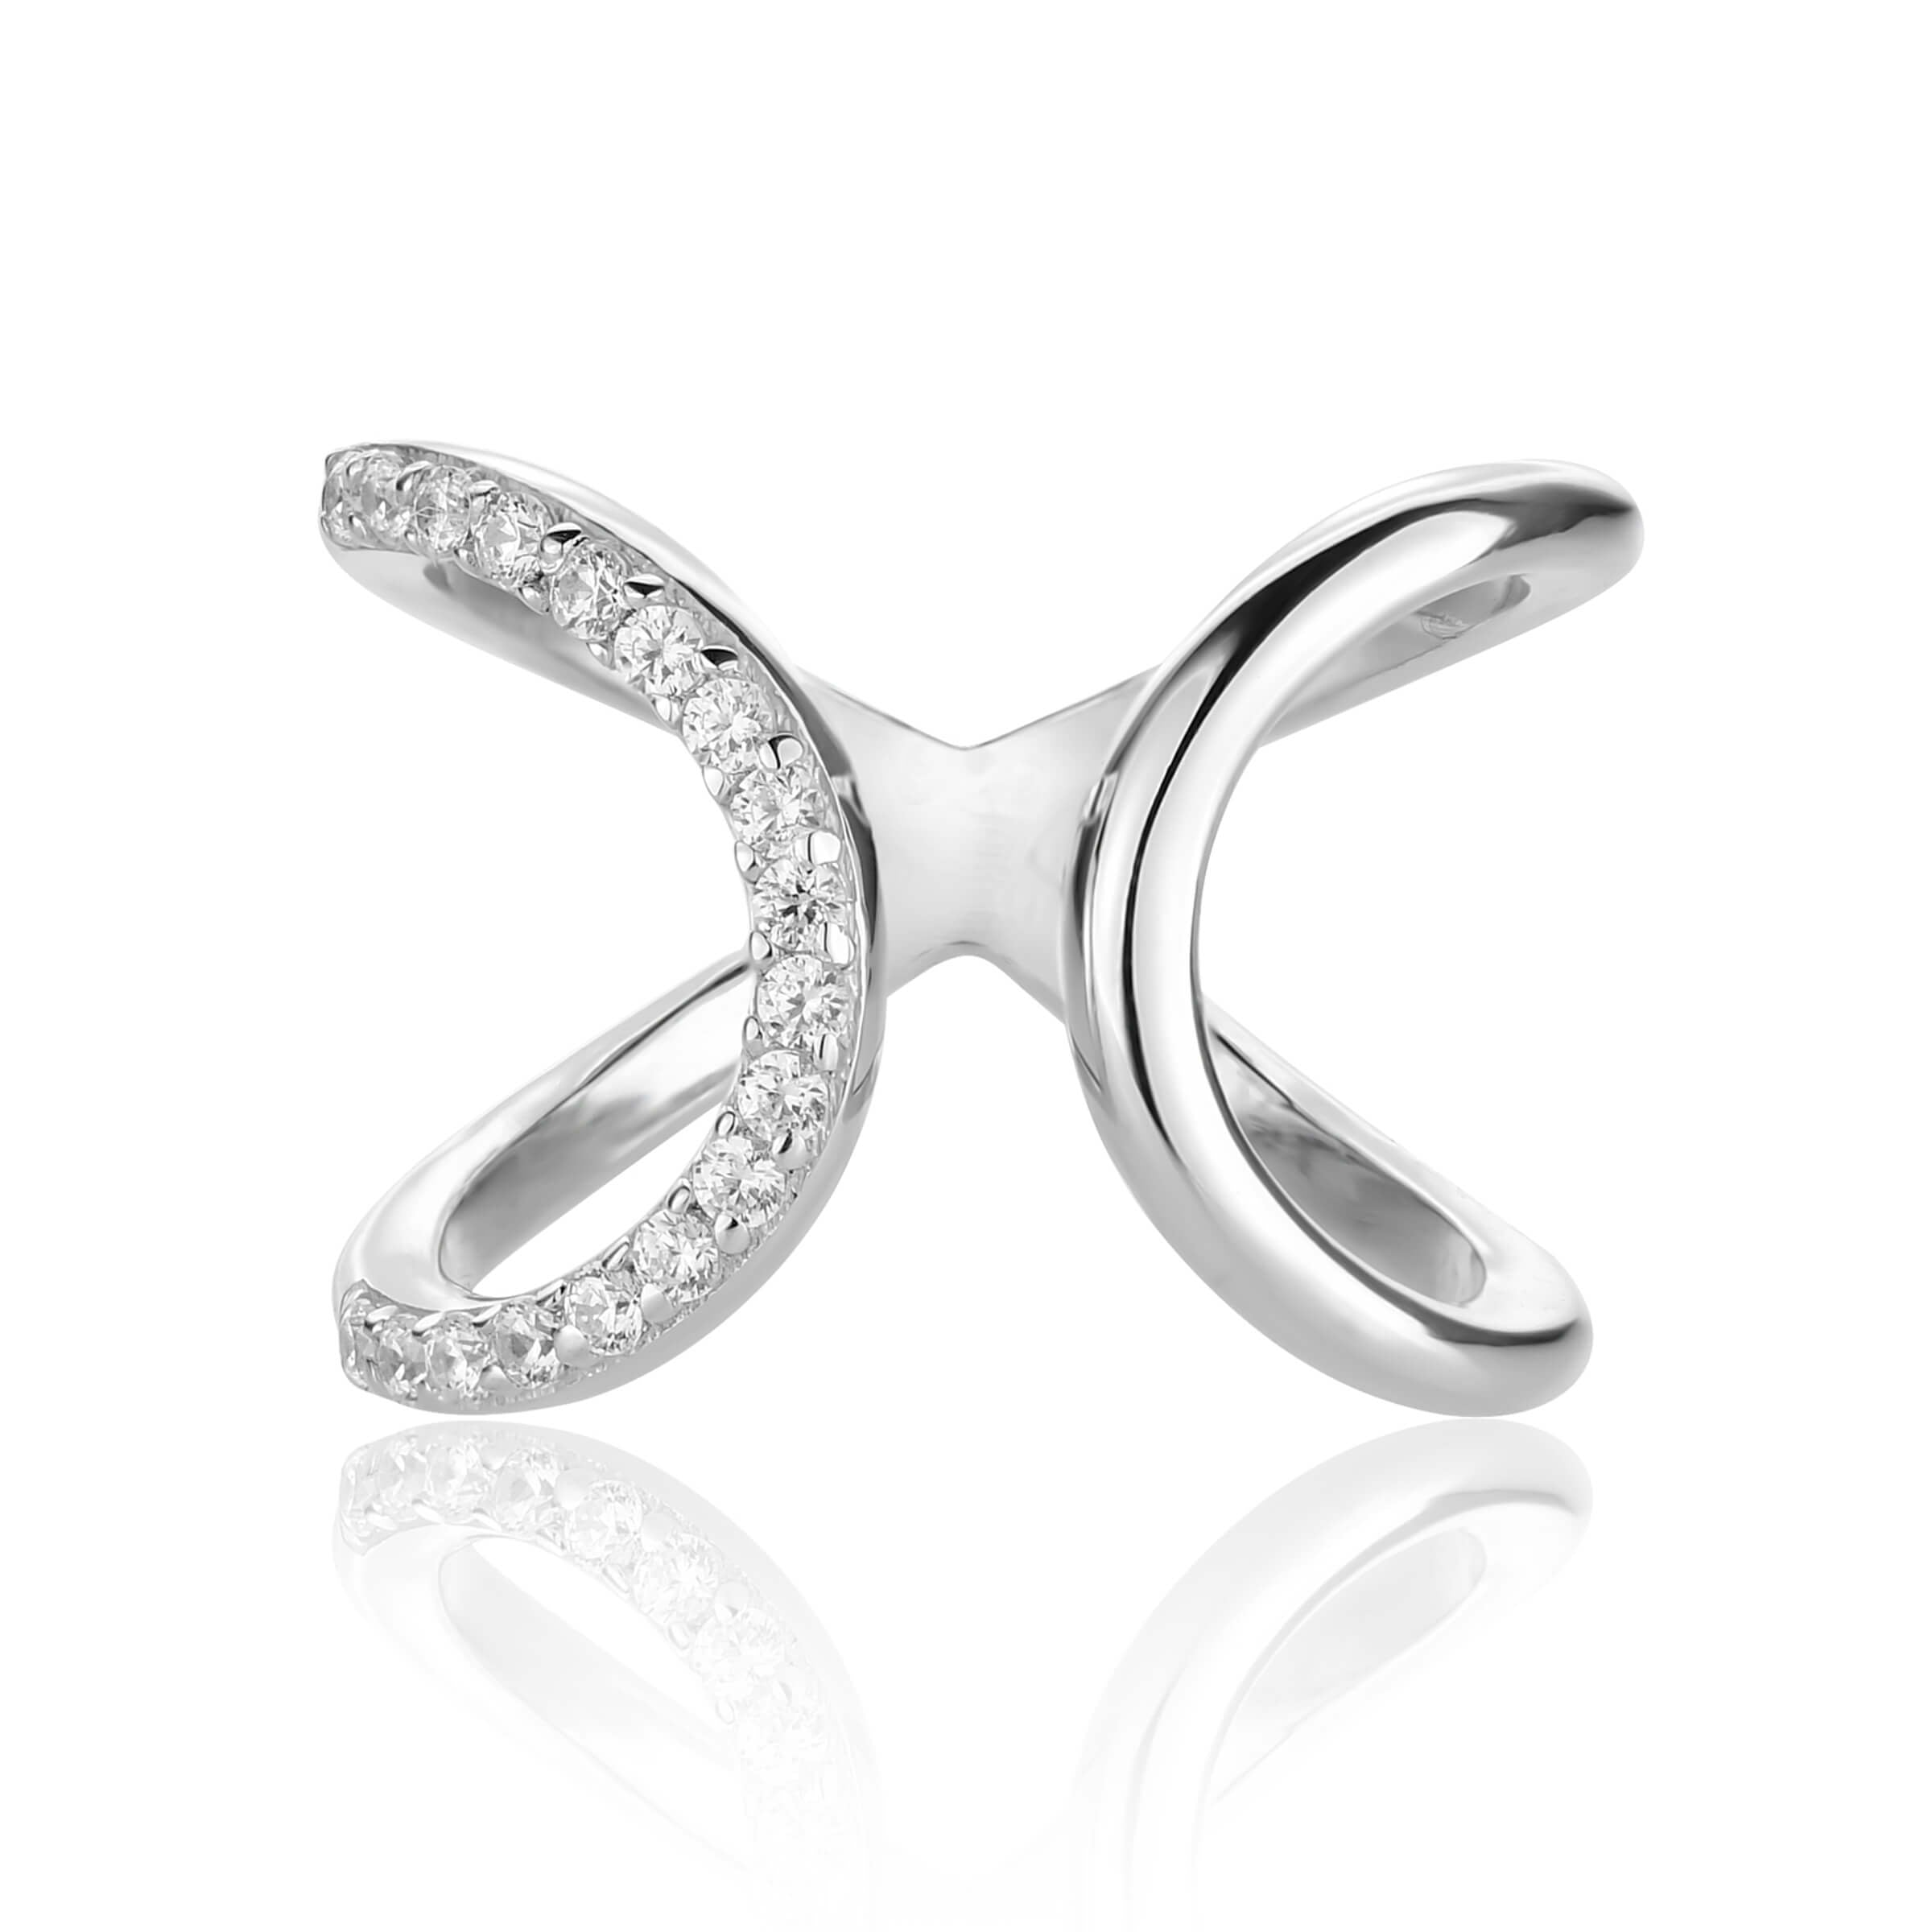 Buy Sterling Silver Heart Shape Swarovski Elements Adjustable Ring For Women  Online at Low Prices in India - Paytmmall.com